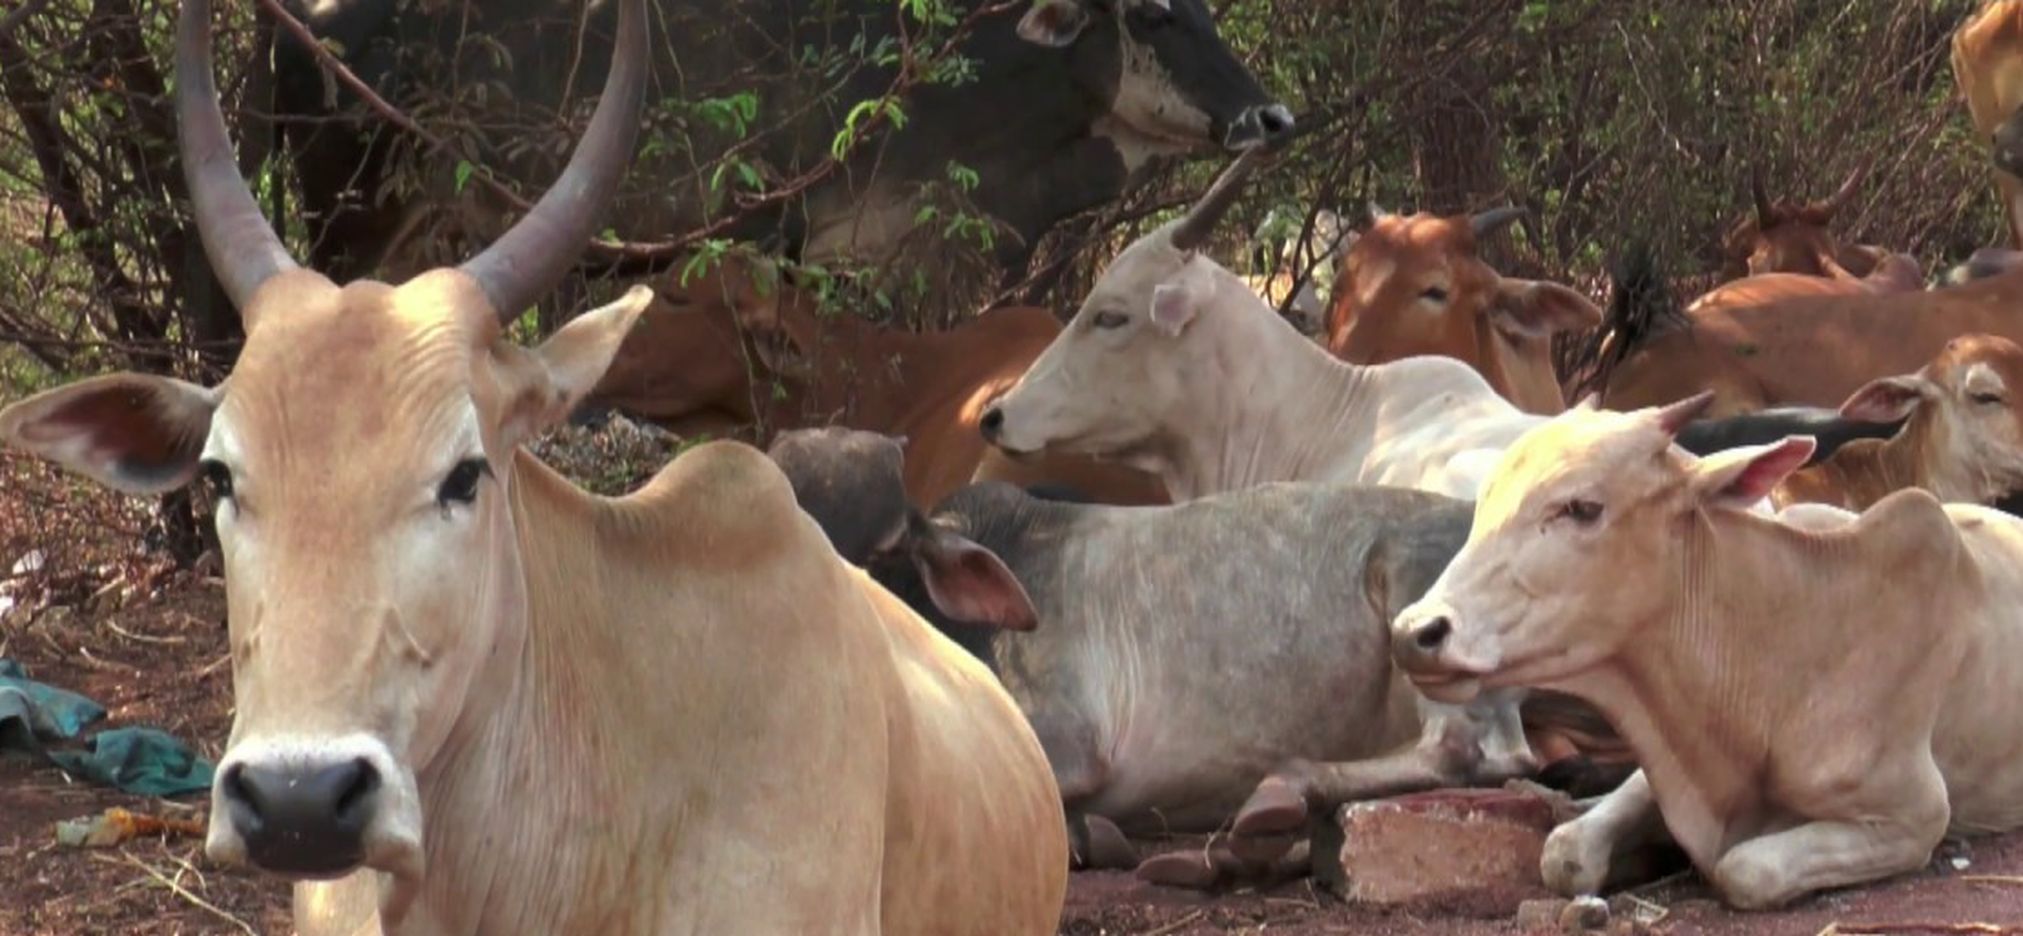 Now the city of Nagaur may get rid of the wandering cows